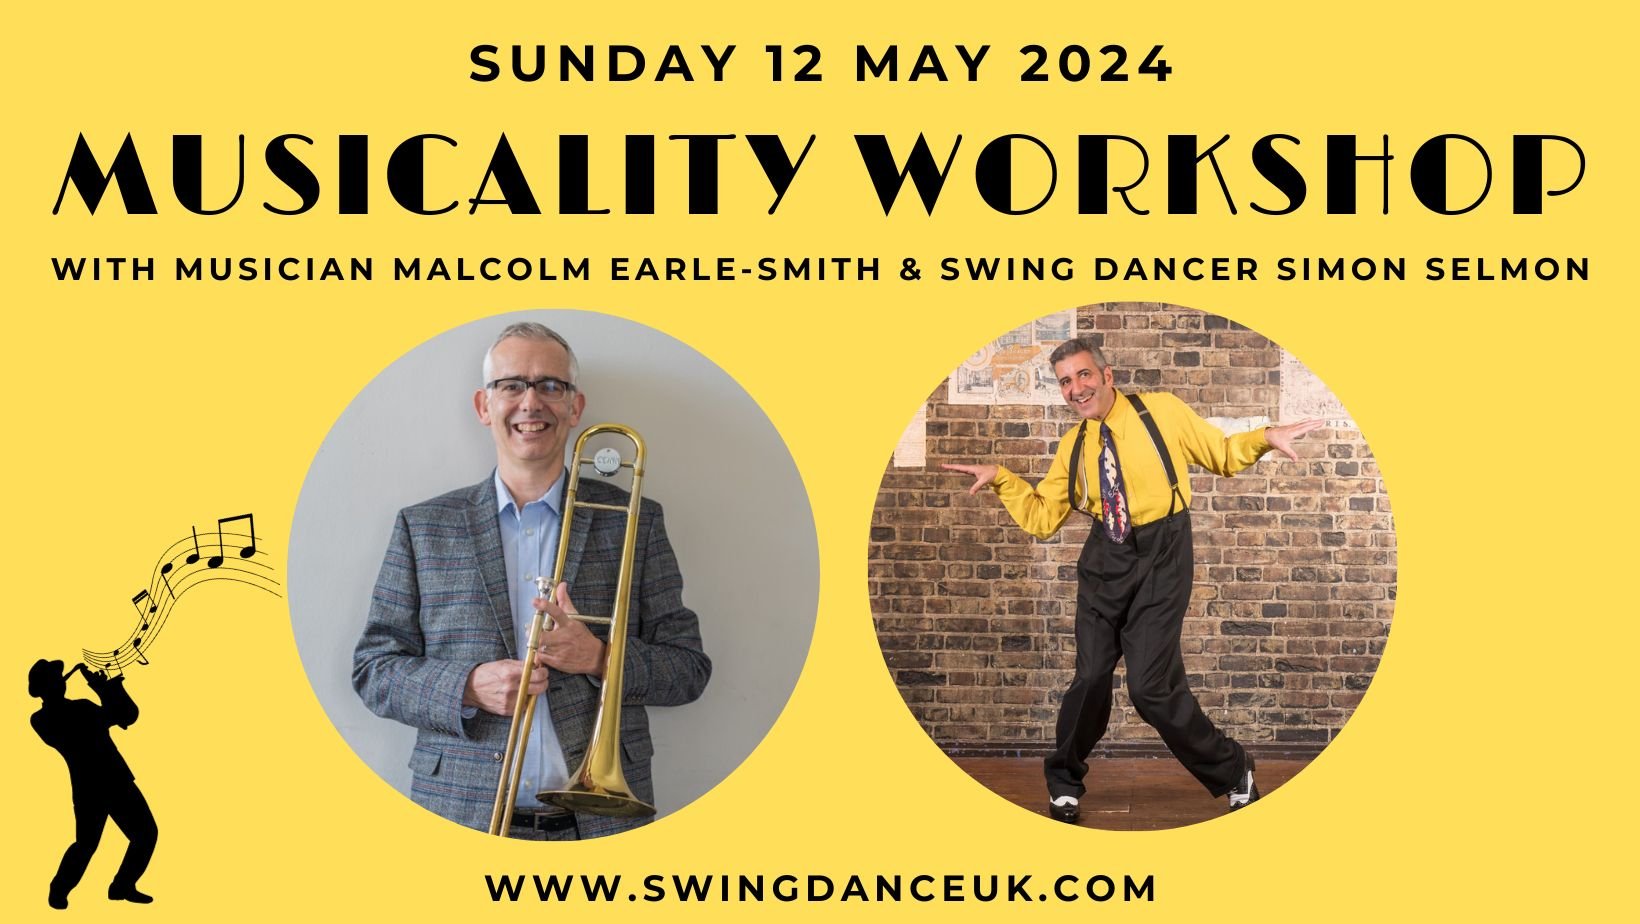 Musicality Workshop featuring Malcolm Earle-Smith & Simon Selmon 12 May 2024